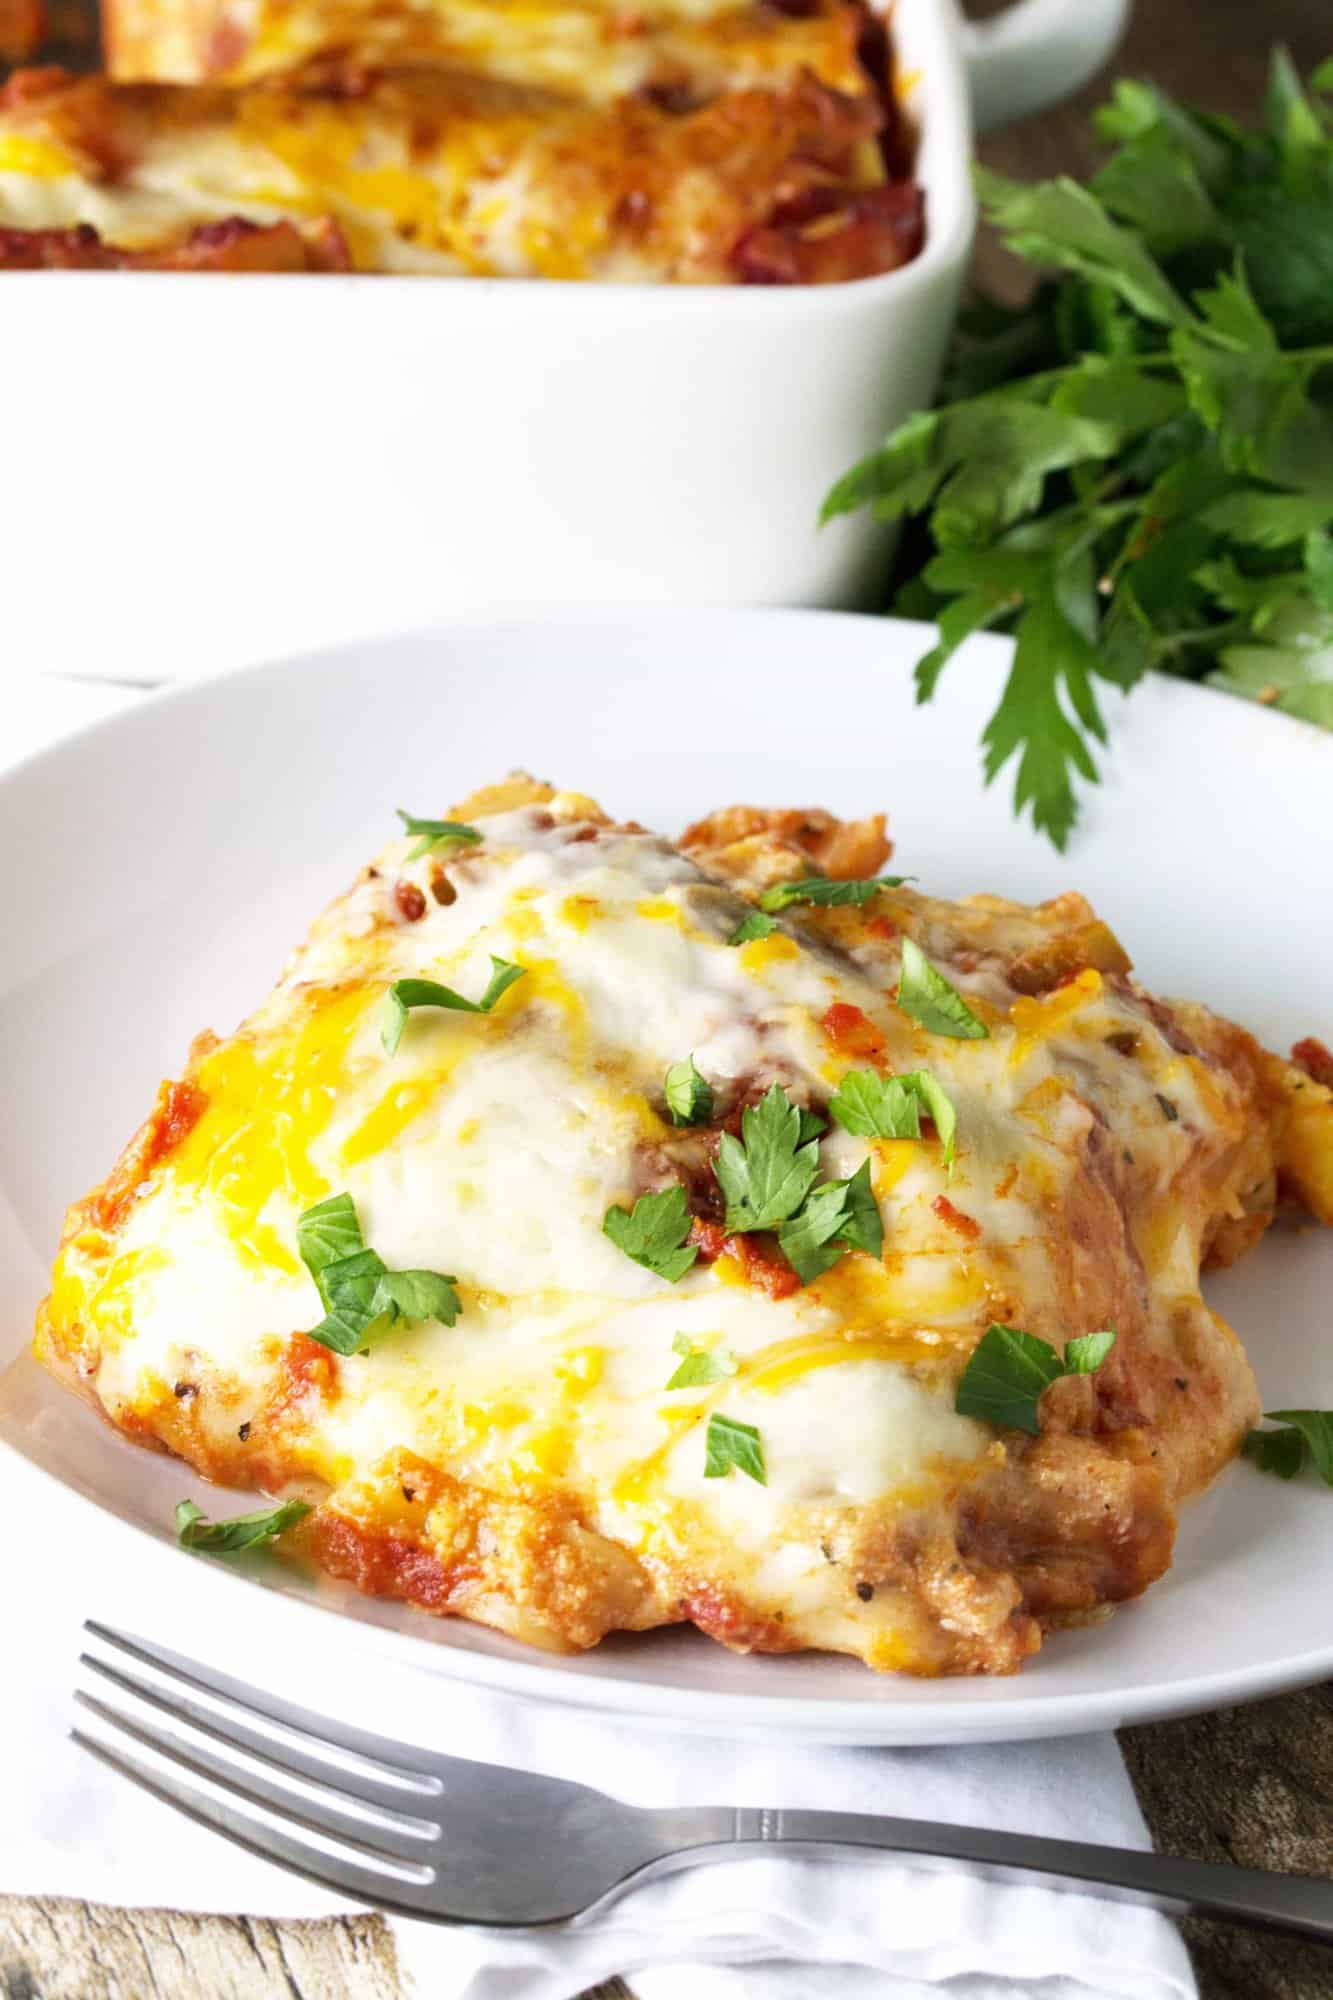 Spice things up with this Cajun Shrimp Lasagna! You'll be blown away with the flavor in this spicy Southern seafood version of lasagna.